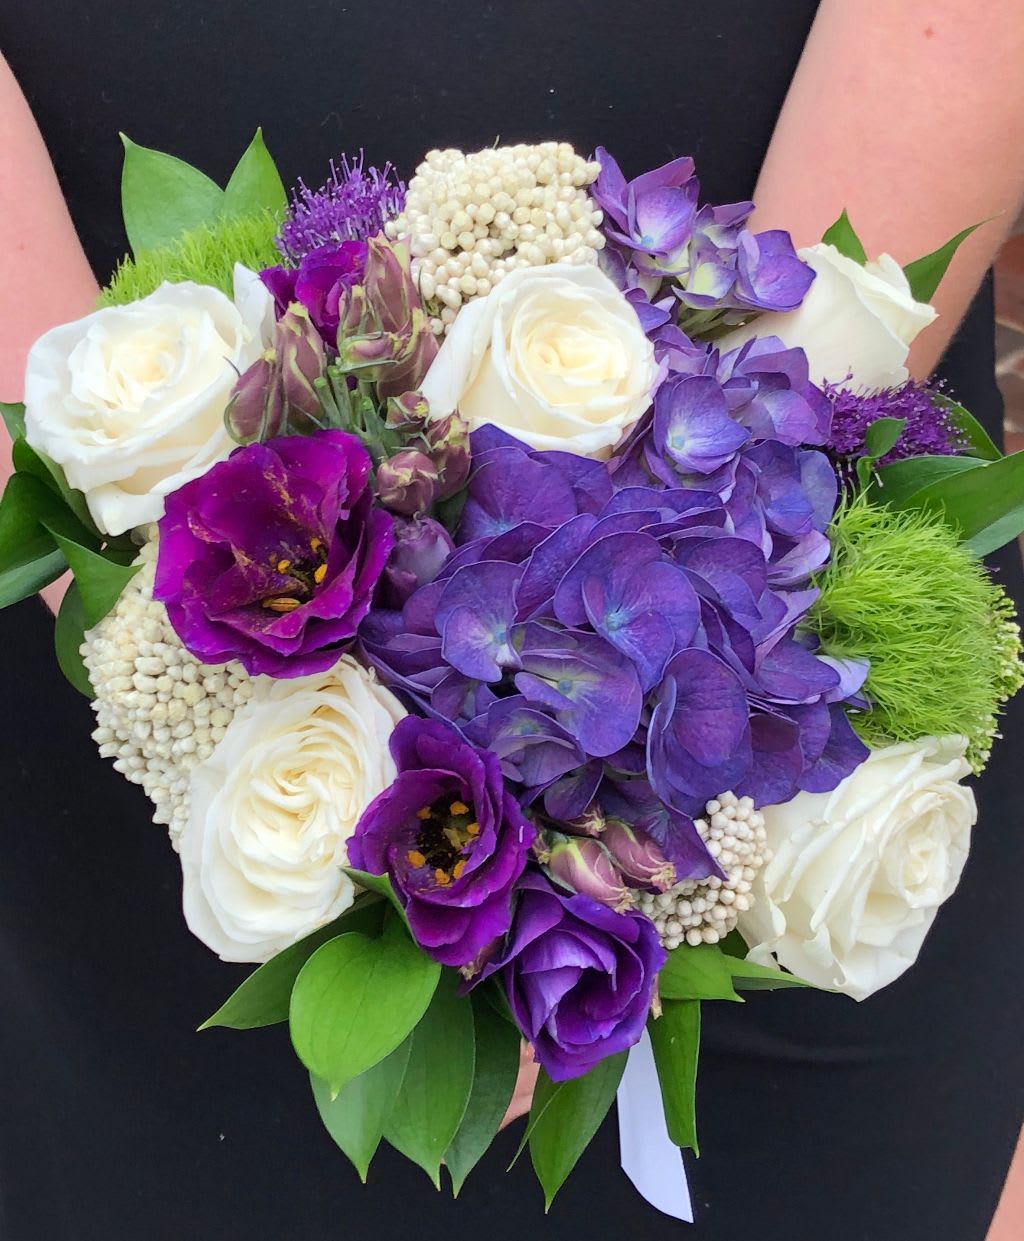 Purple Passion Handheld Bouquet *unavailable April 29th - May 12th* - Purple hydrangea, purple lisanthus, white roses, riceflower and green trick round out this purple bouquet.  *Photo features the deluxe version of this handheld* Tax free, same day hand delivery. 